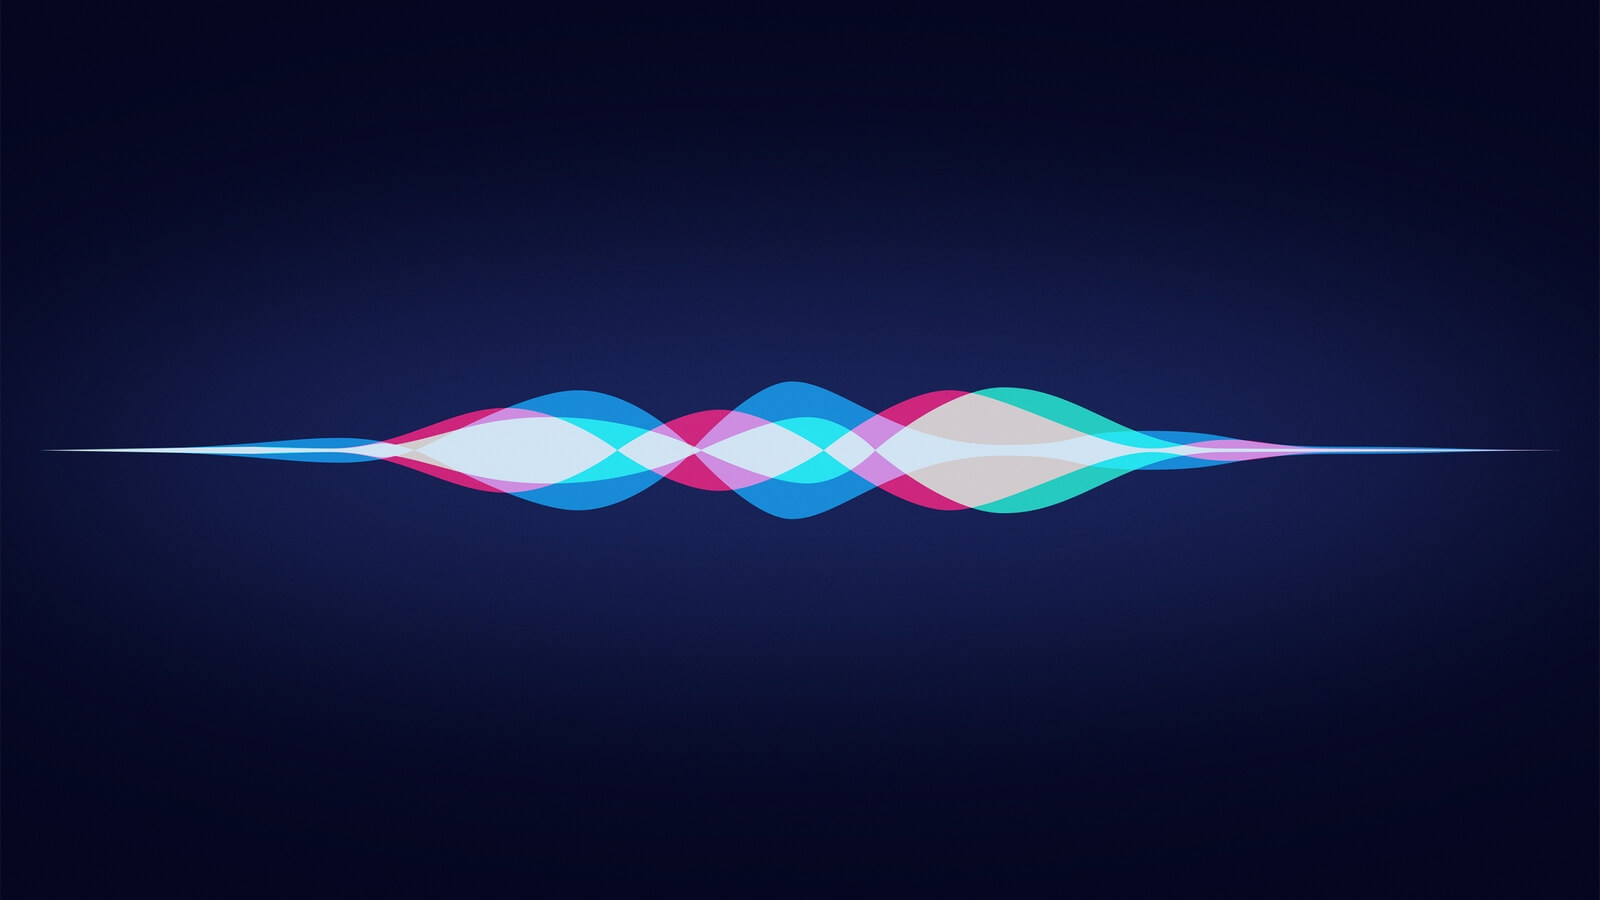 apple is developing a feature that will allow siri to be able to read lips